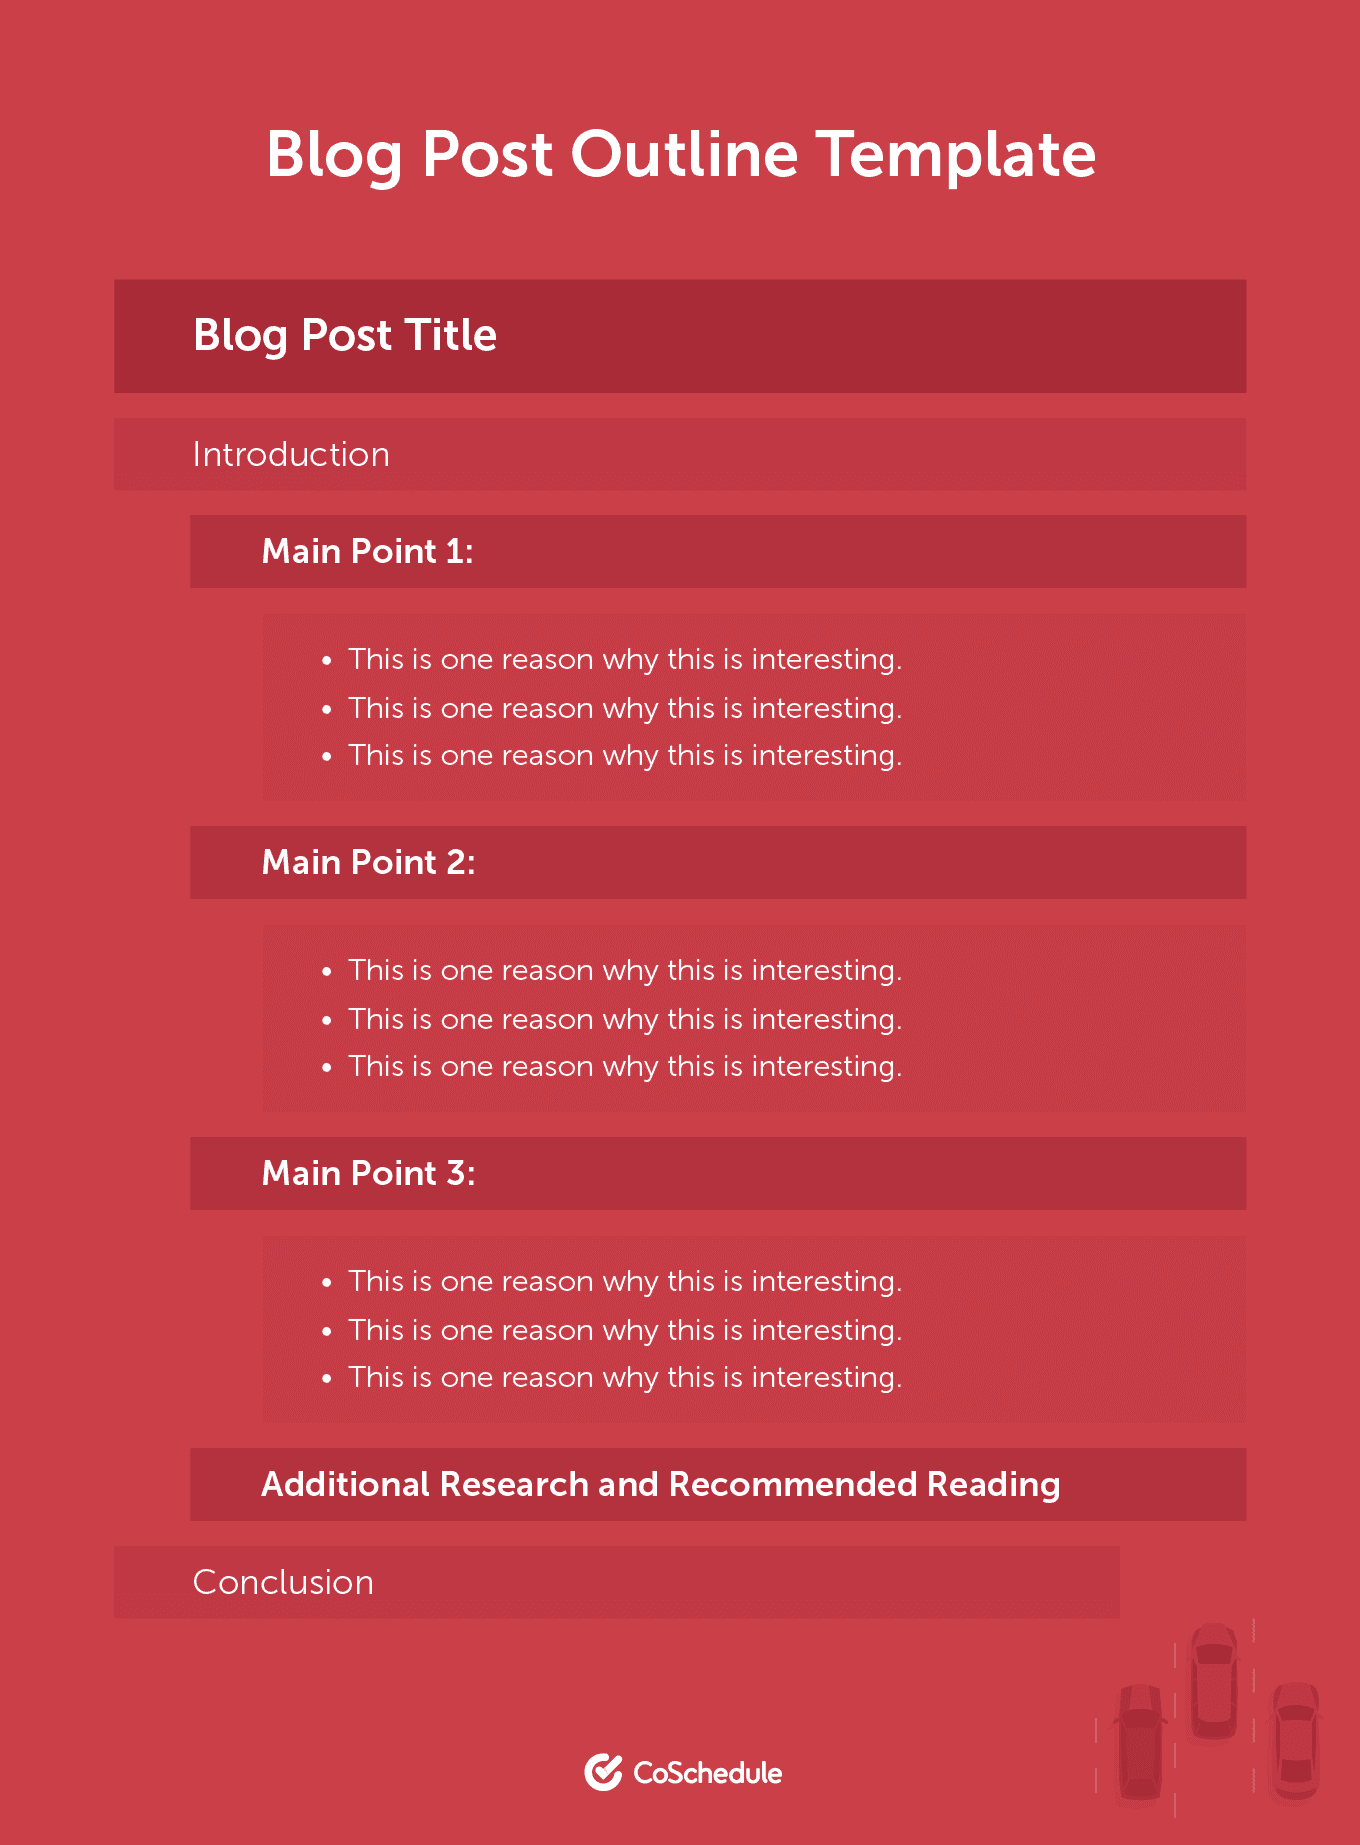 Example of a Blog Post Outline Template